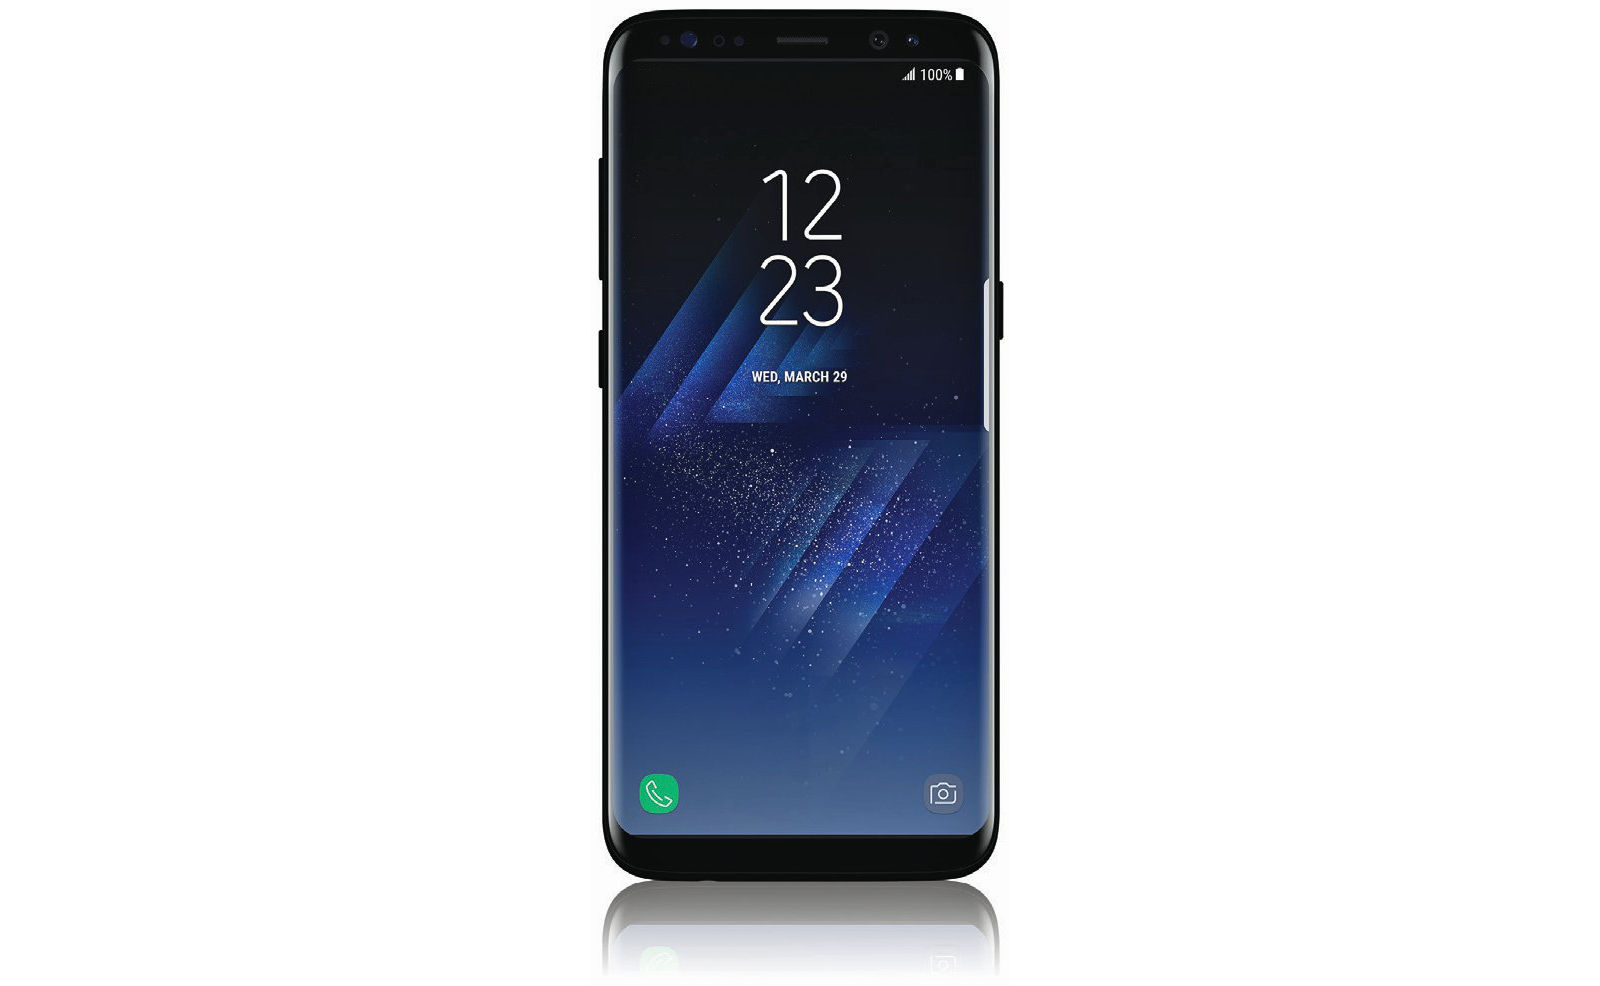 https://www.engadget.com/2017/03/16/the-galaxy-s8-may-use-your-face-for-secure-mobile-payments/